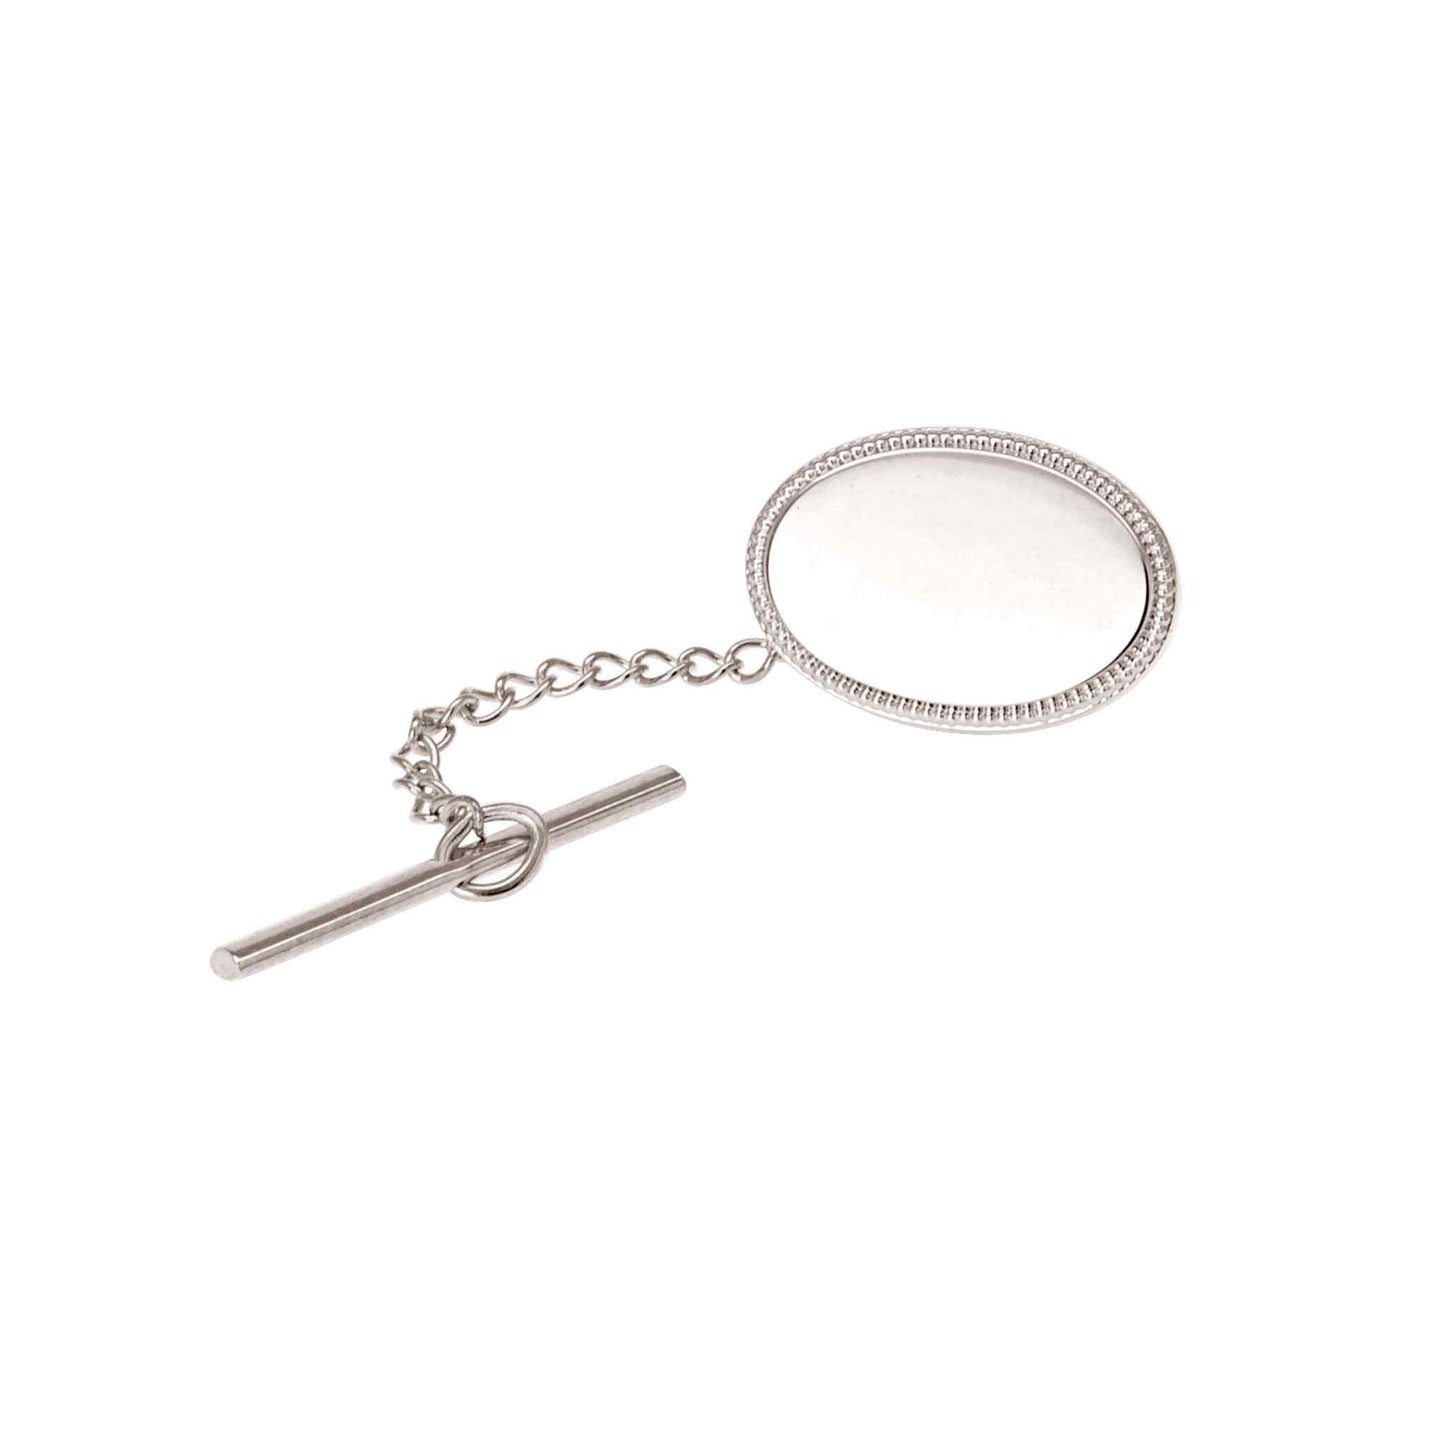 A oval tie tack with beaded edge displayed on a neutral white background.